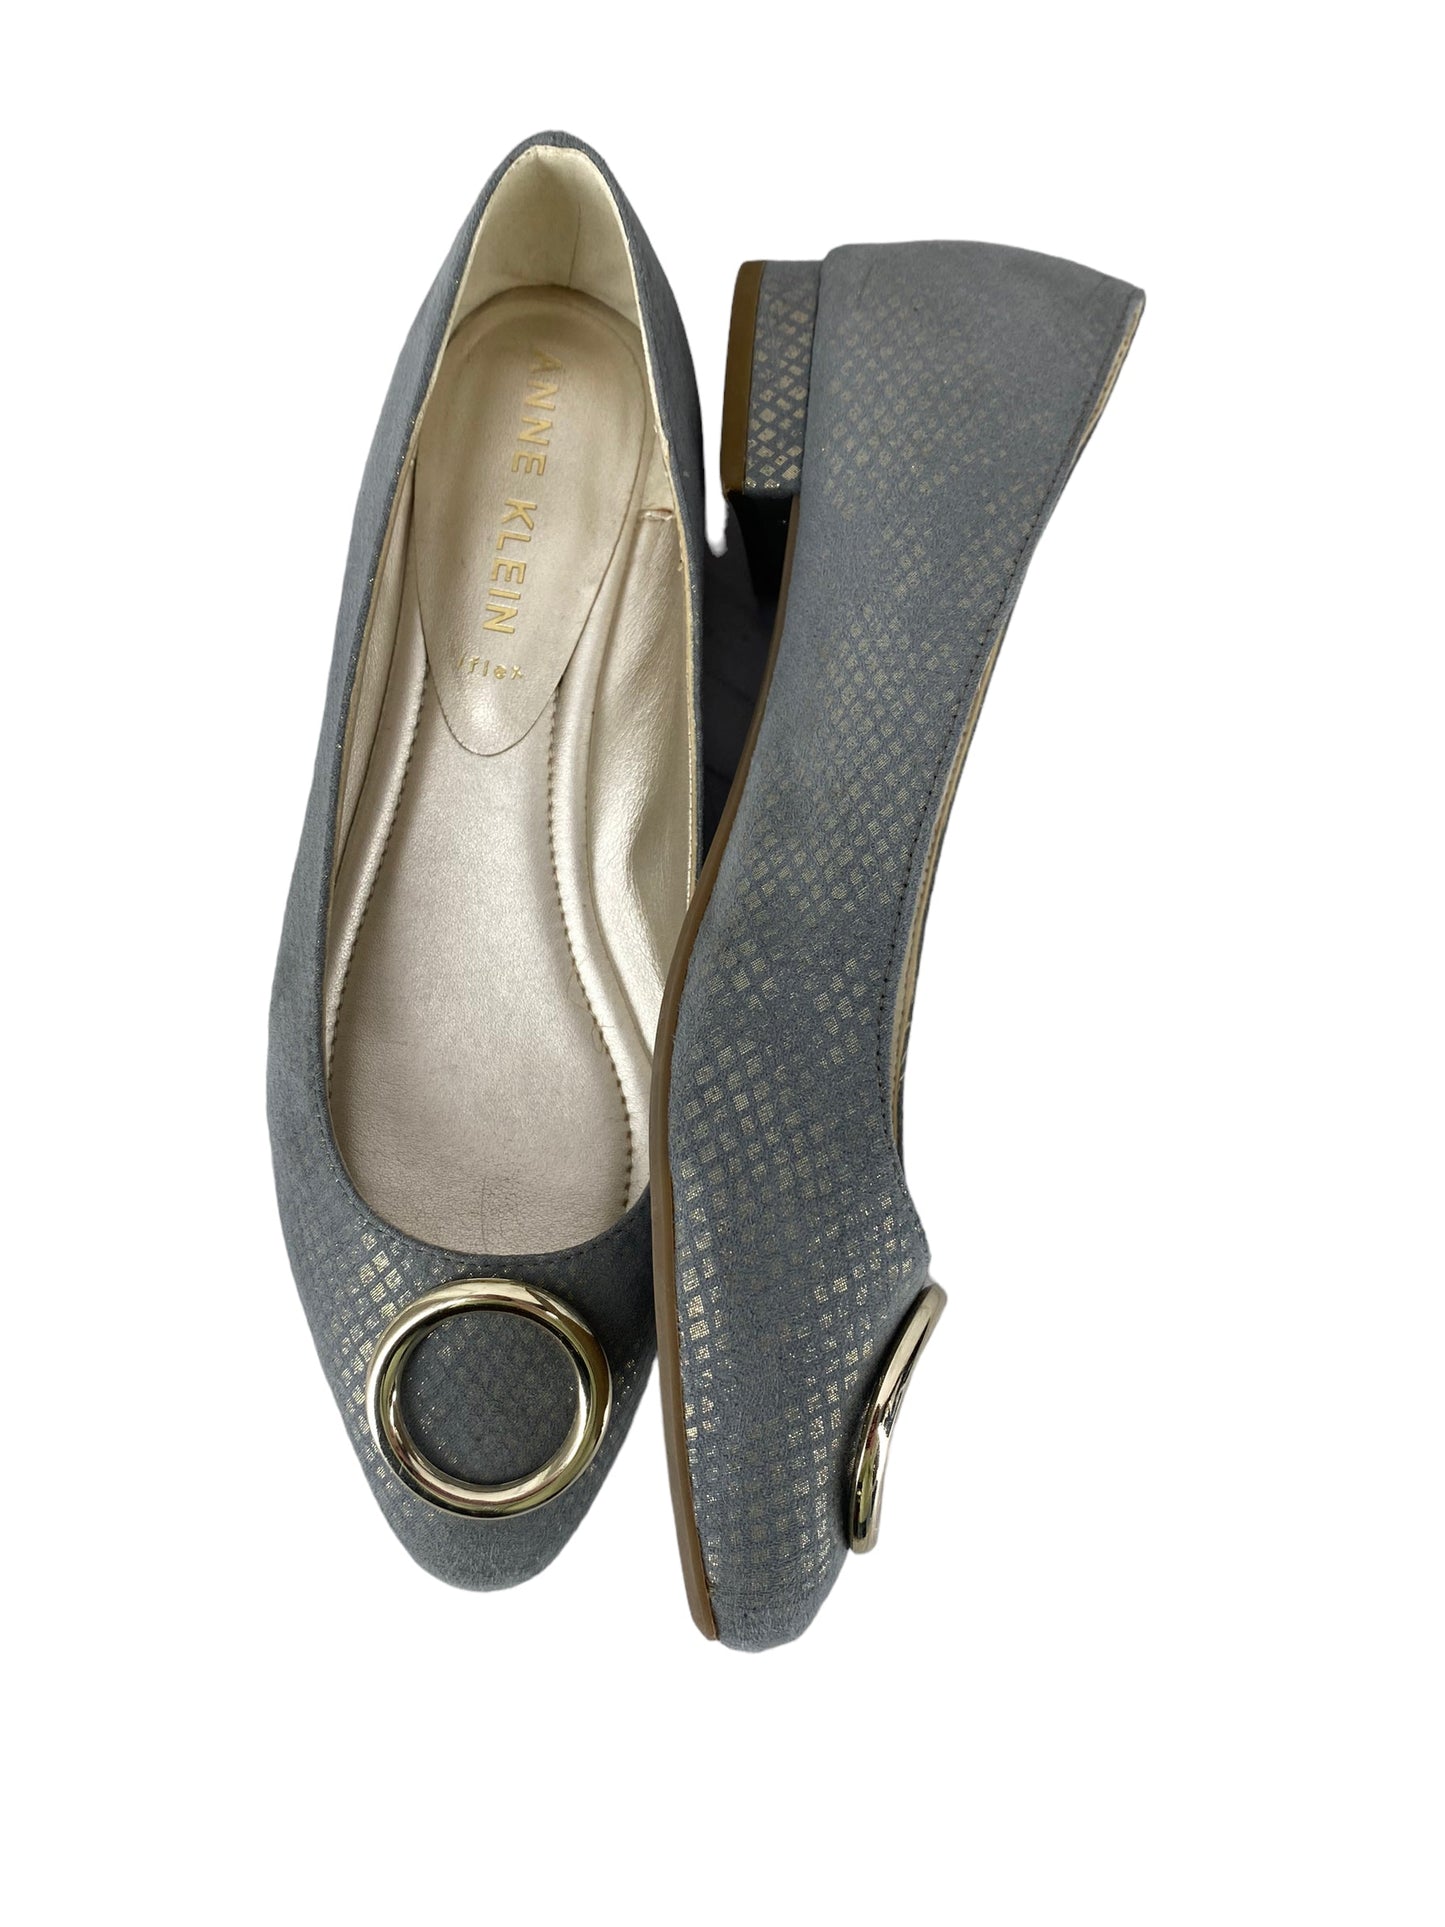 Shoes Flats Other By Anne Klein  Size: 8.5